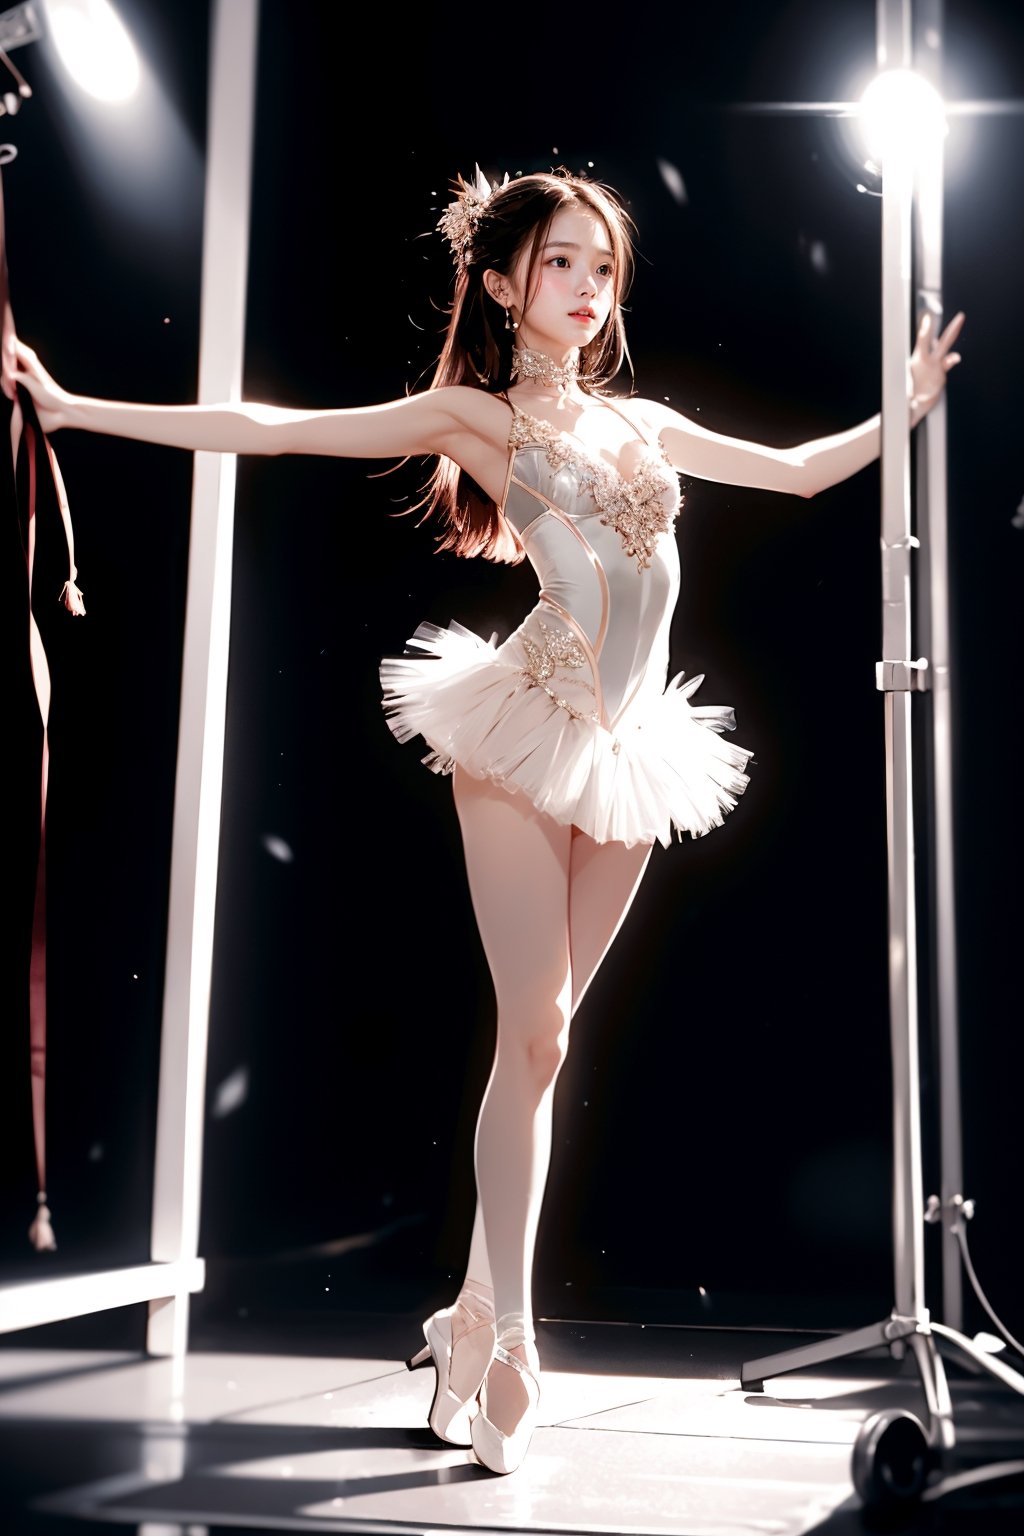 solo, An 18-year-old Korean girl wearing ballet costume (full body) dances alone in a dimly lit studio, her movements reflected in the soft spotlight. This scene highlights her dedication and artistic loneliness, echoing themes of personal growth in Iwai Shunji's work. The atmosphere of the scene is captured with a high graininess reminiscent of ISO 800 film. ,IU,1 girl,WaveMiu